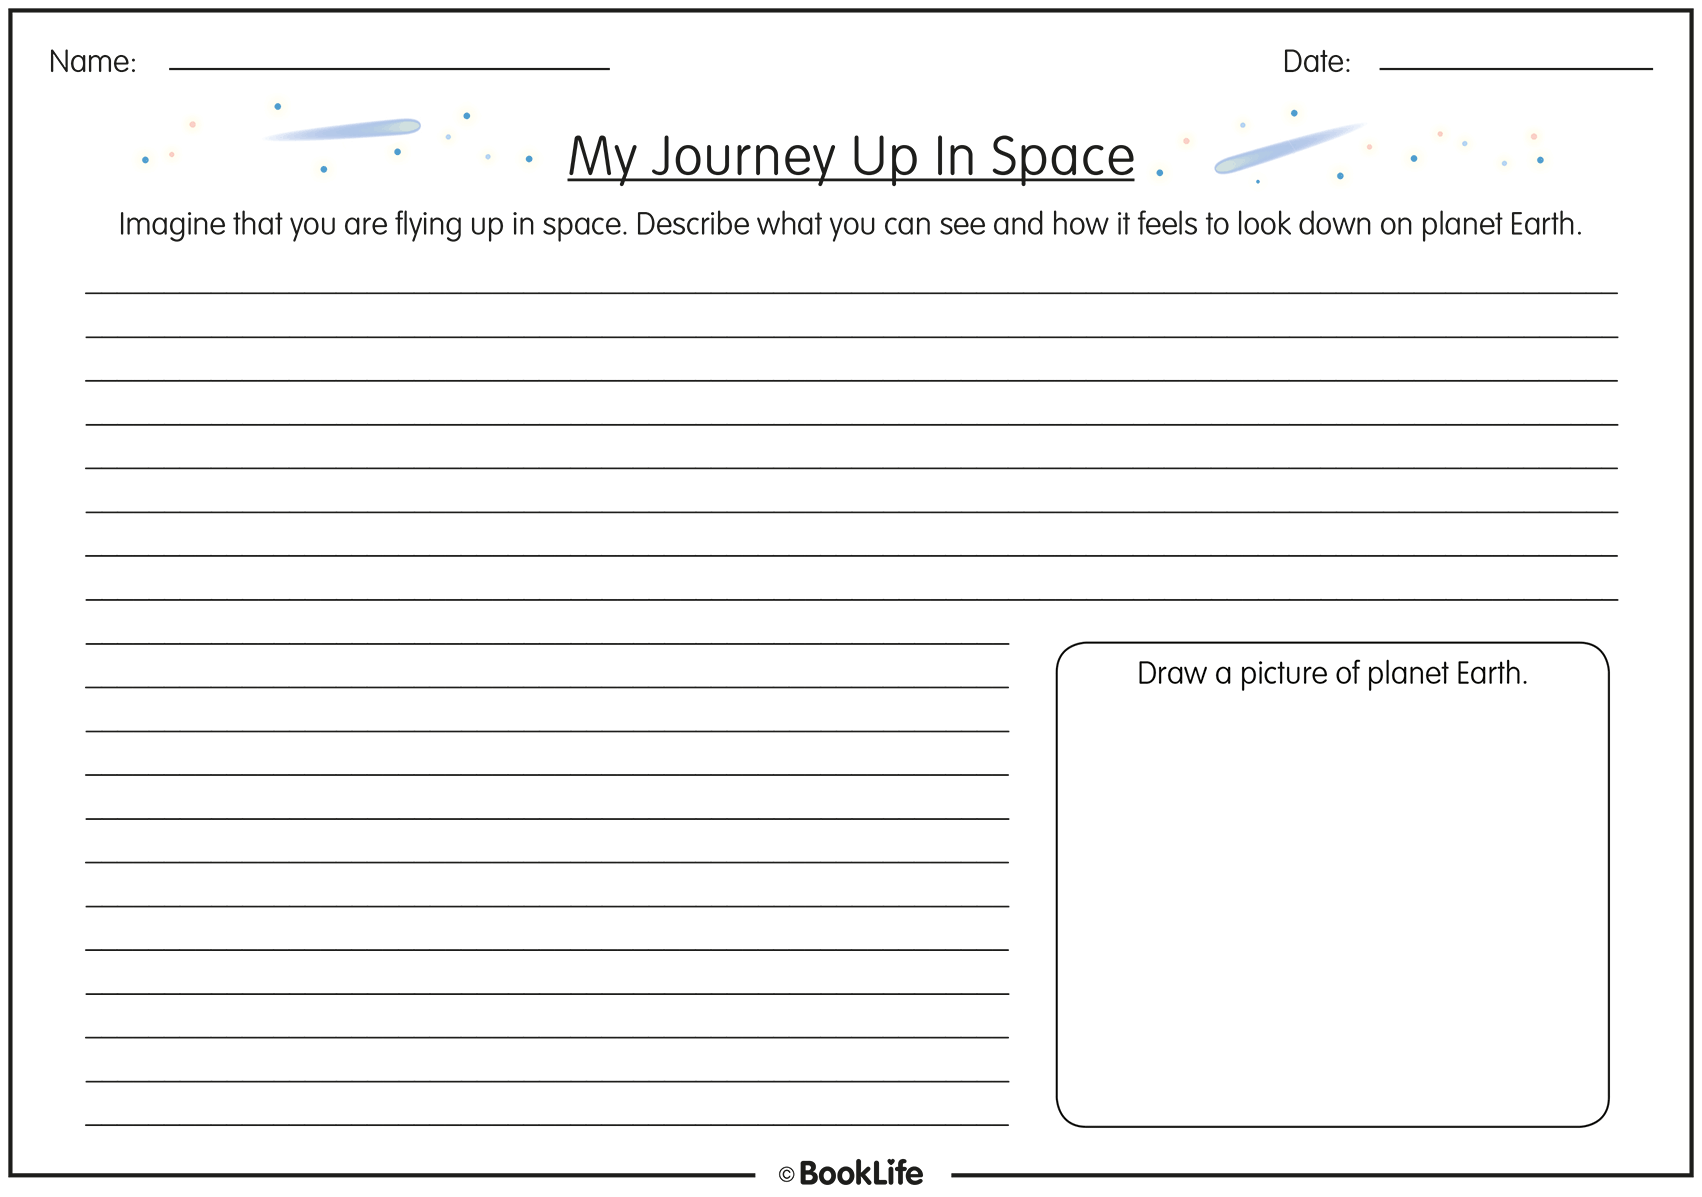 My Journey Up In Space by BookLife